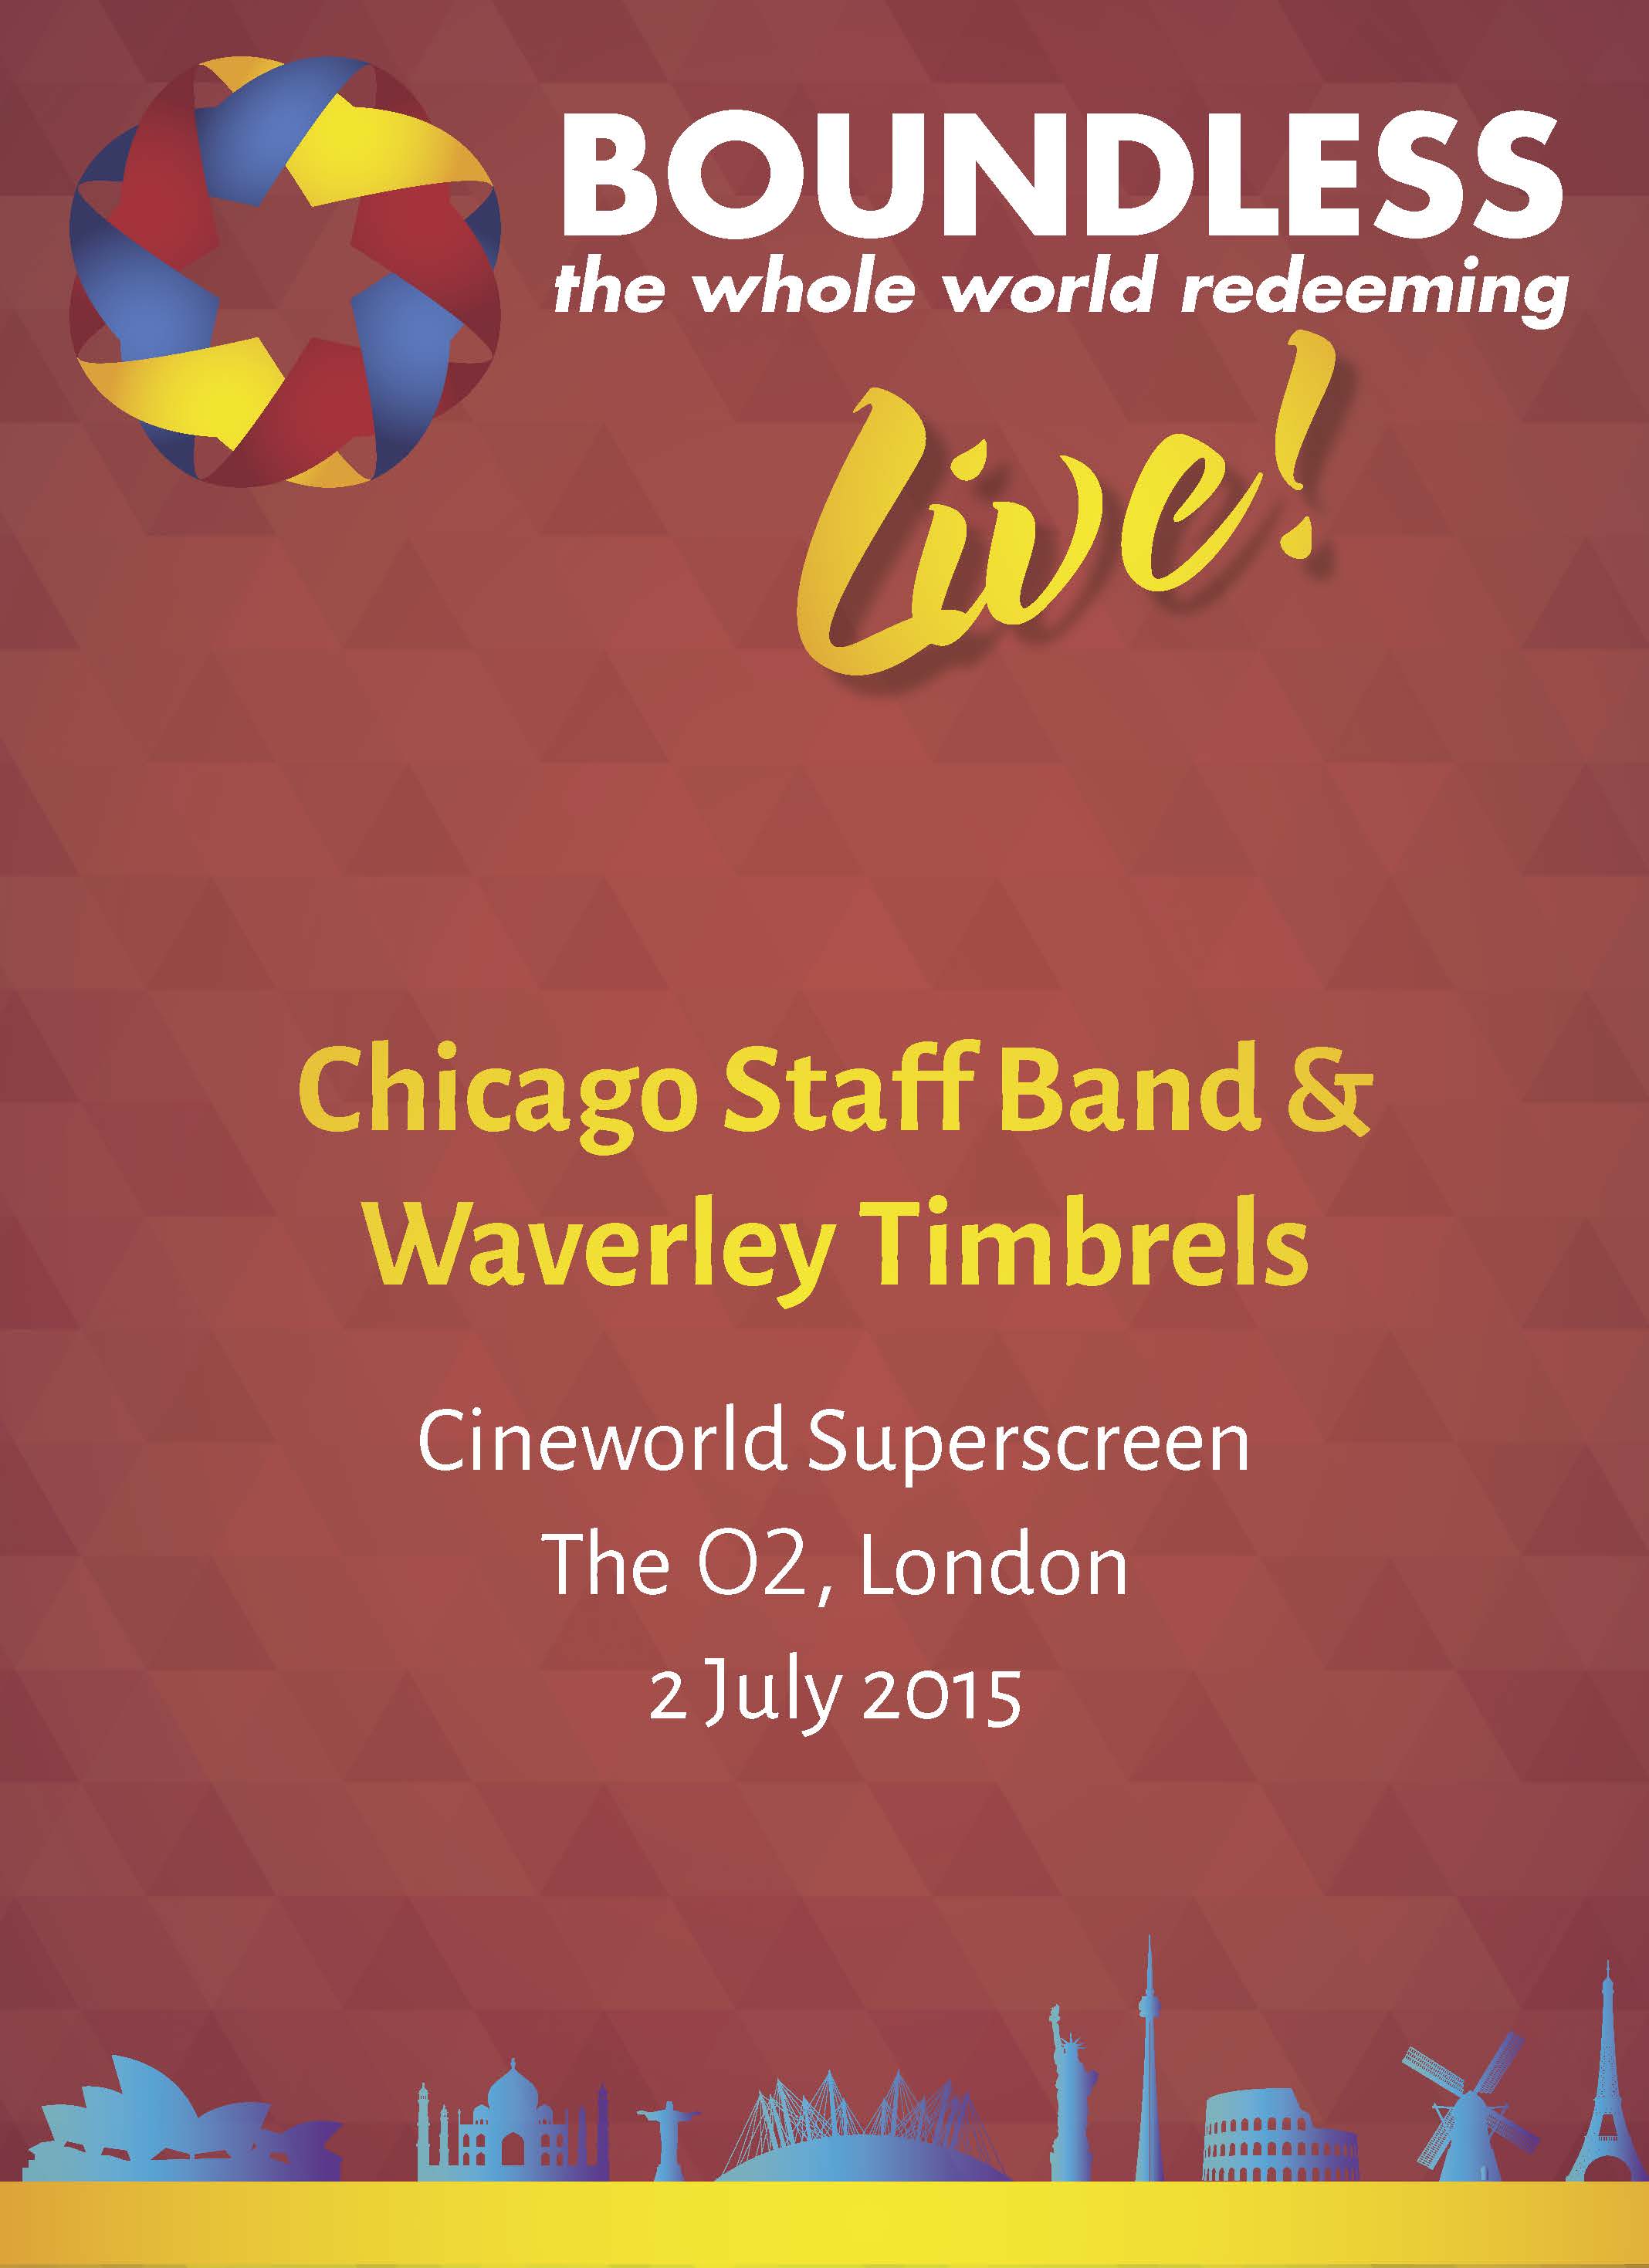 Boundless Live! Concert - Chicago Staff Band and Waverley Timbrels